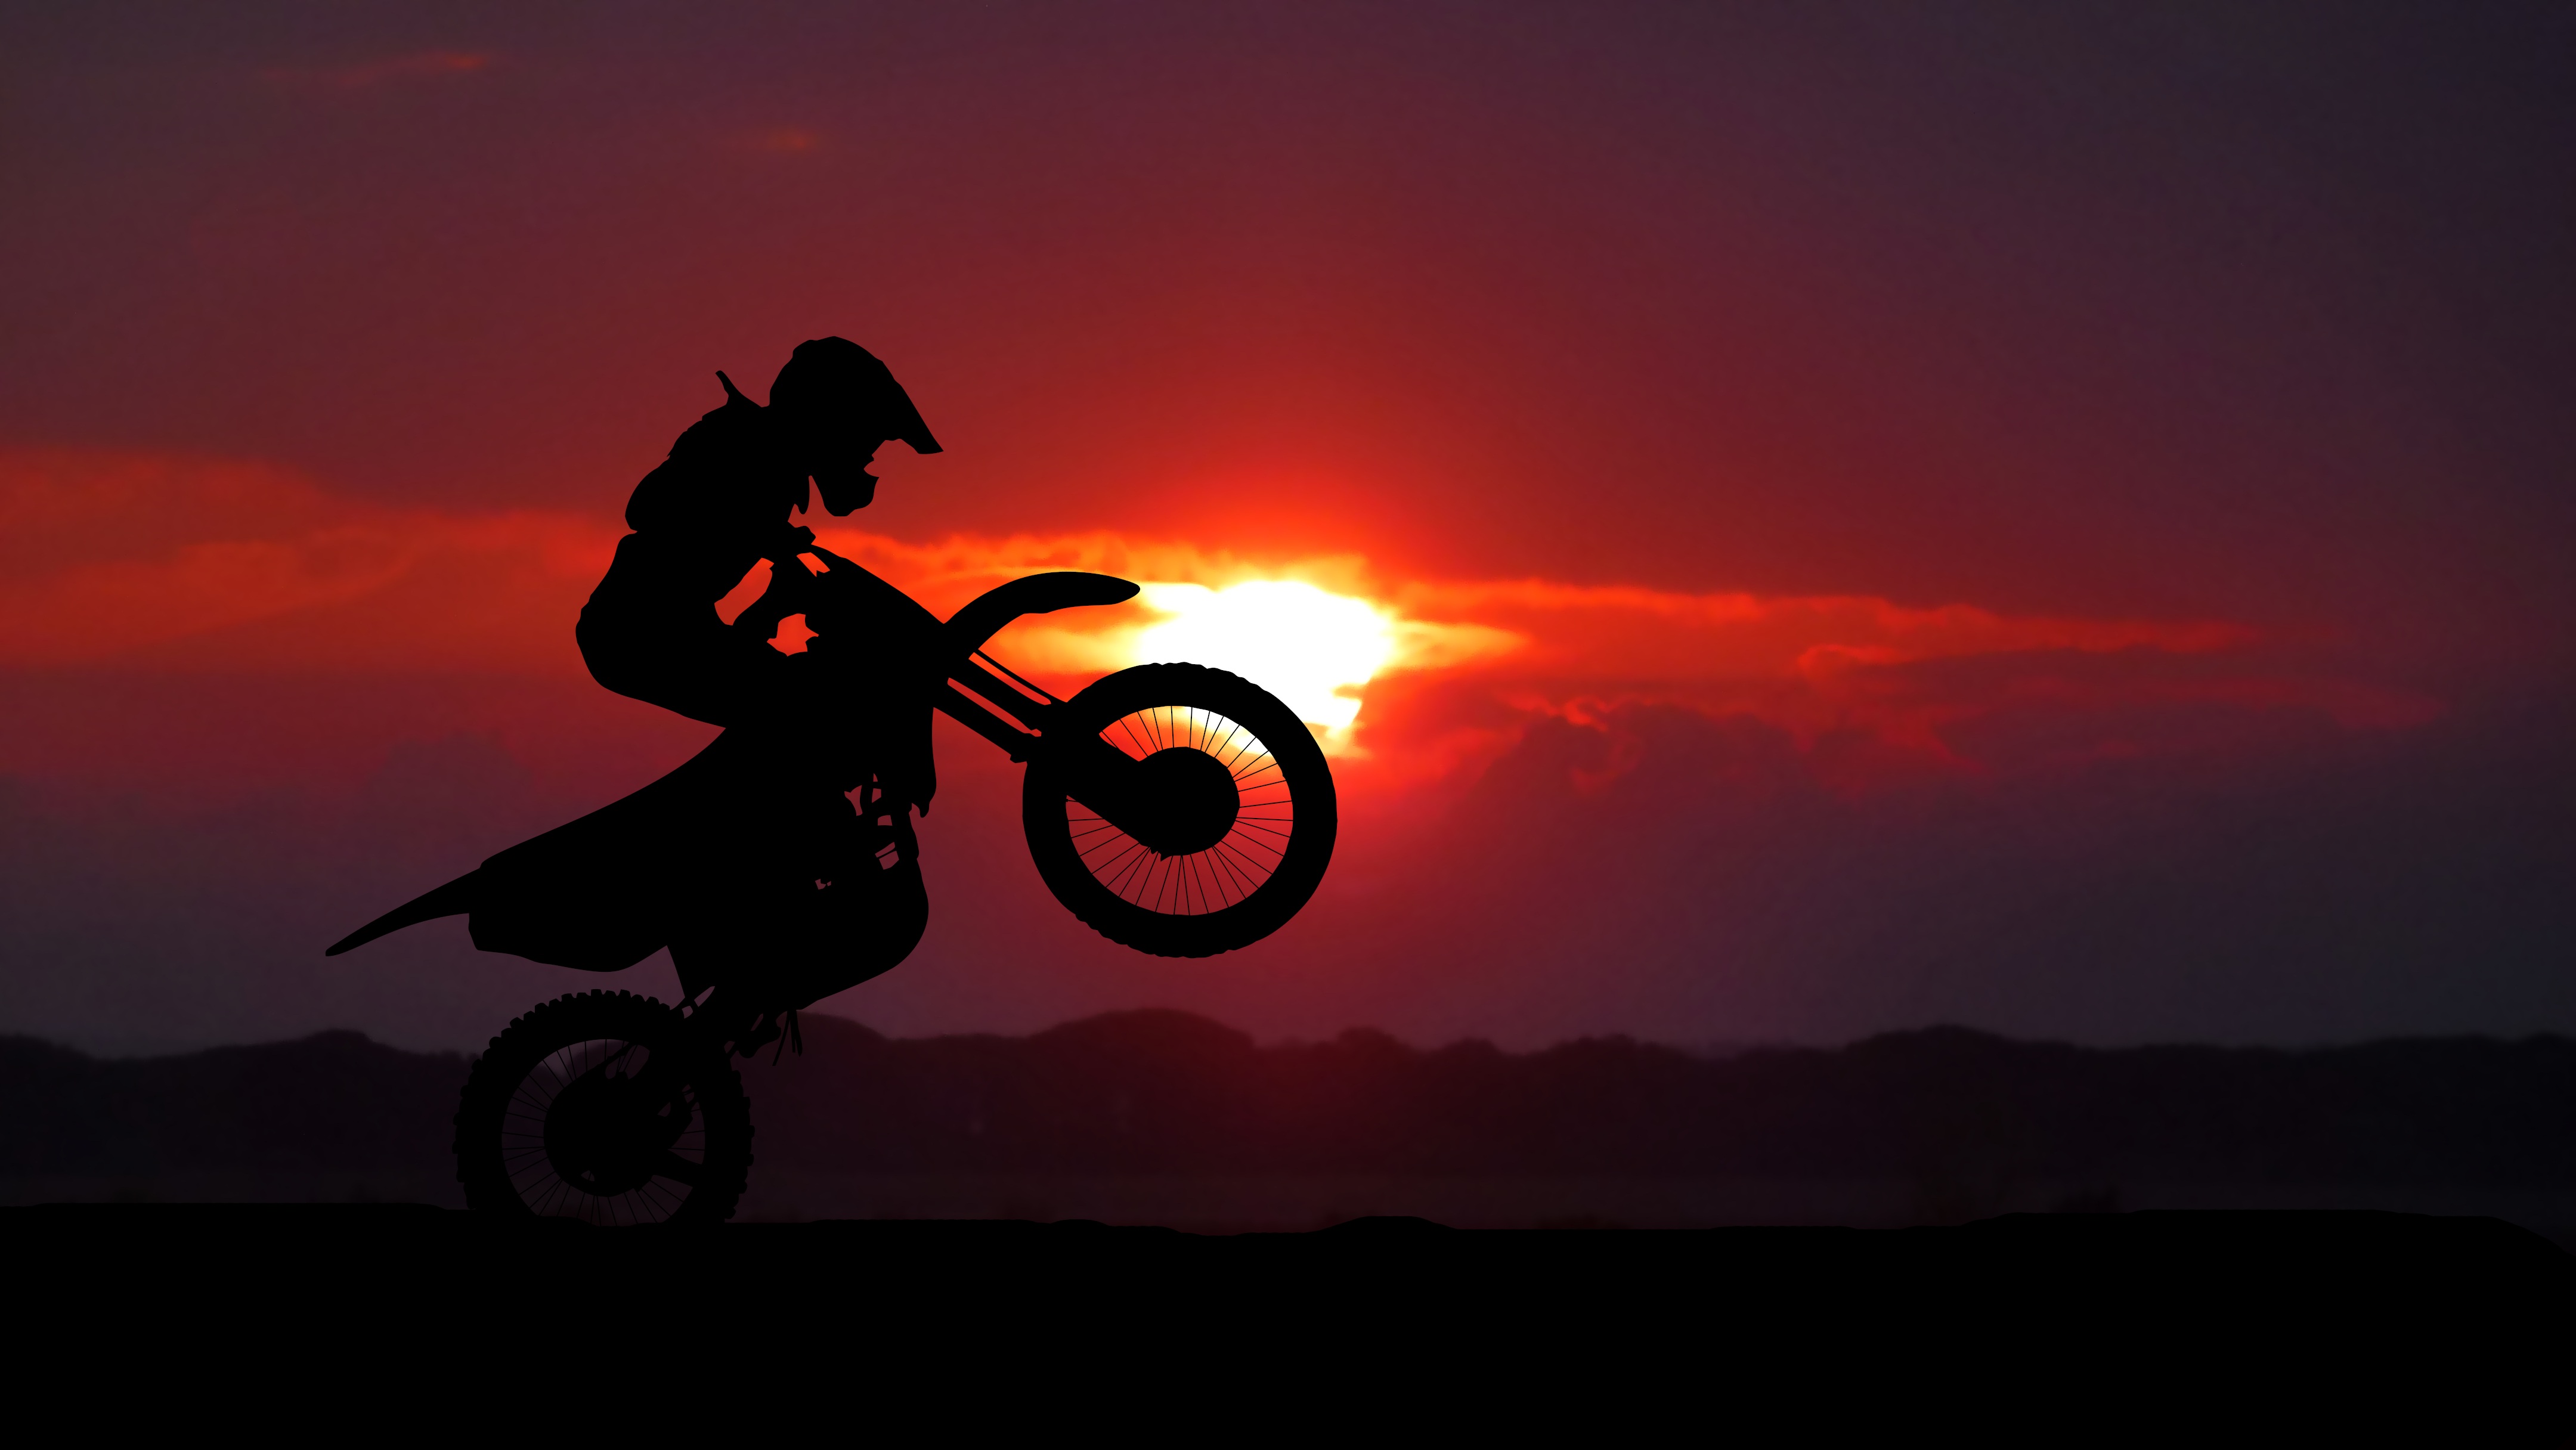 motorcycle, sunset, motorcycles, silhouette, motorcyclist, trick, cross